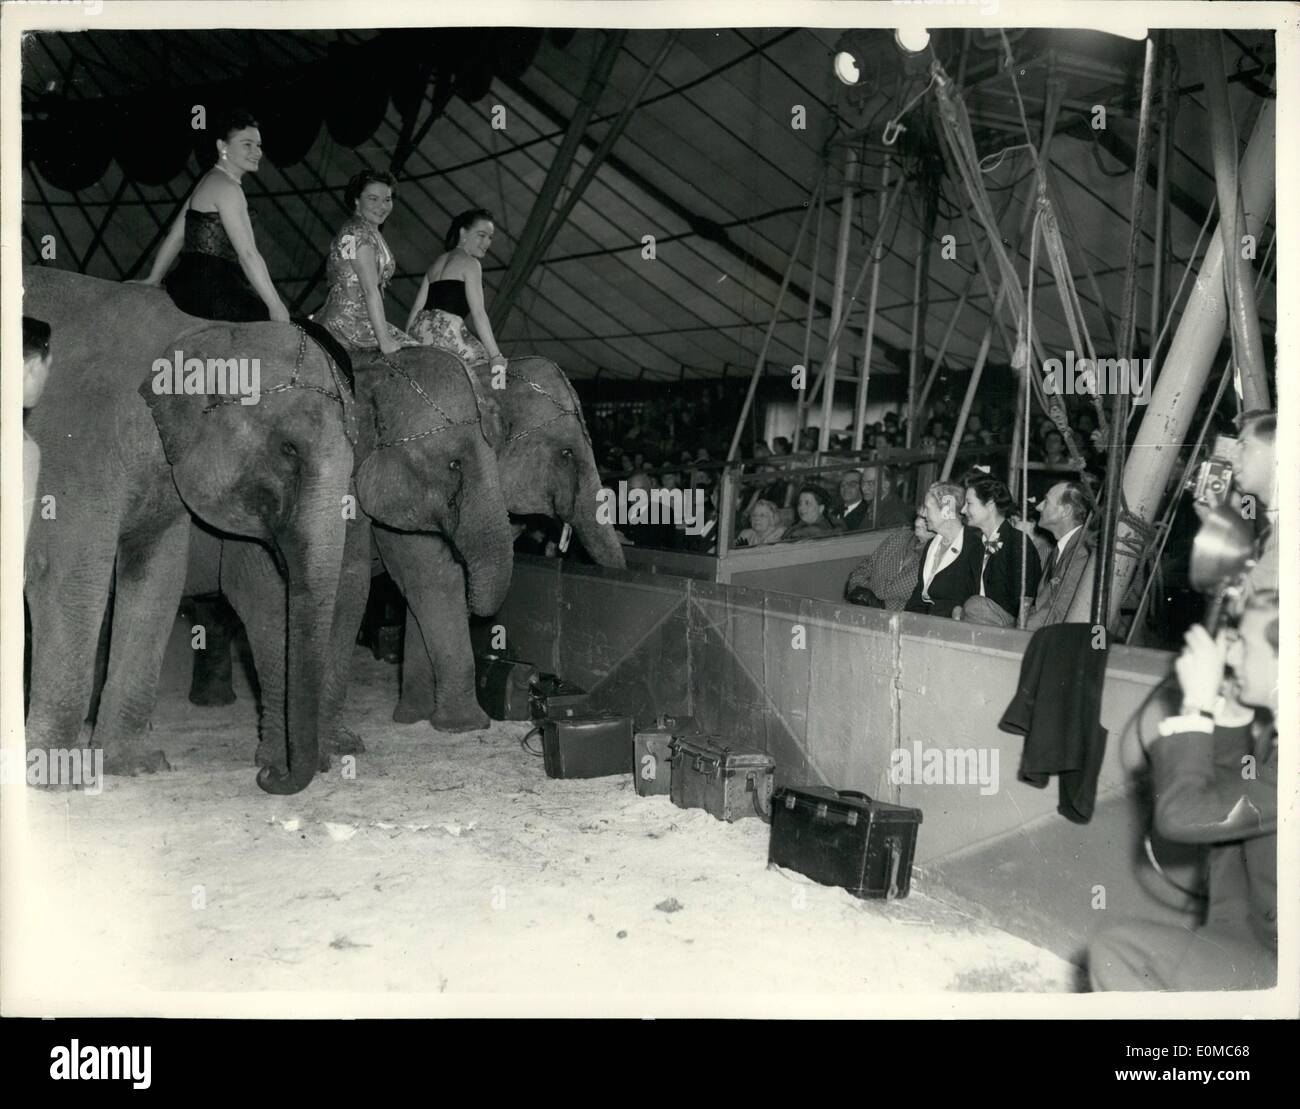 Aug. 08, 1954 - Girous fashion Festival.. Elephant take part. A number of West end Management book part in a unique fashion display of Autoimmune and winter style - midst the animals in the chipper field Citrous Ring- at Blackheath the morning. Keystone photo shows: Wearing evening dresses - as some of the mannequin ride elephants - during the display this morning. They are L-R:- Maureen; Sheila and Doreen. Stock Photo